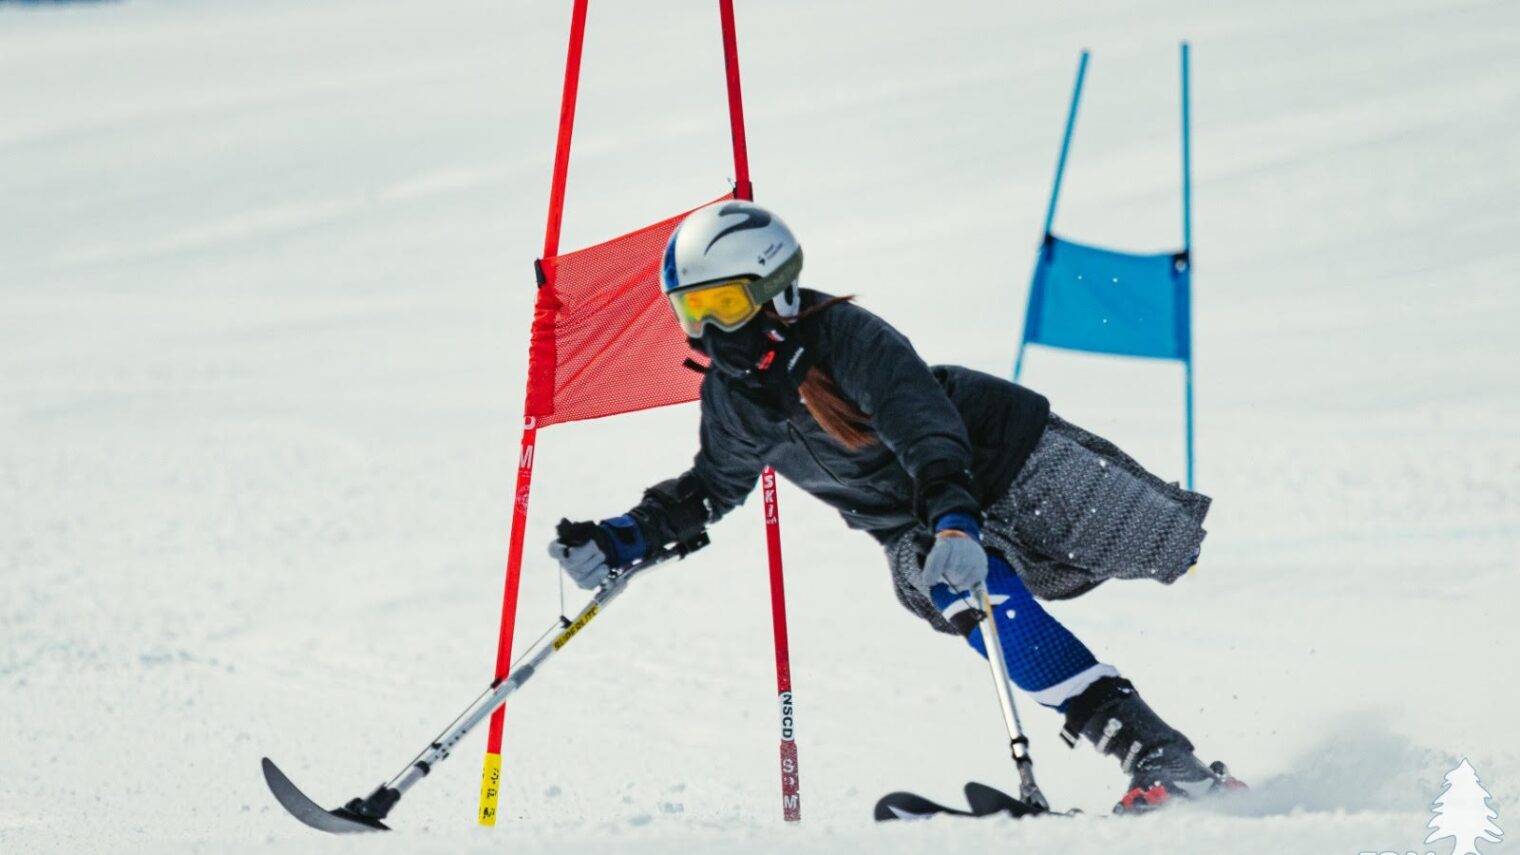 Sheina Vaspi, Israel’s first Winter Paralympian. Photo courtesy of the Israel Paralympic Committee